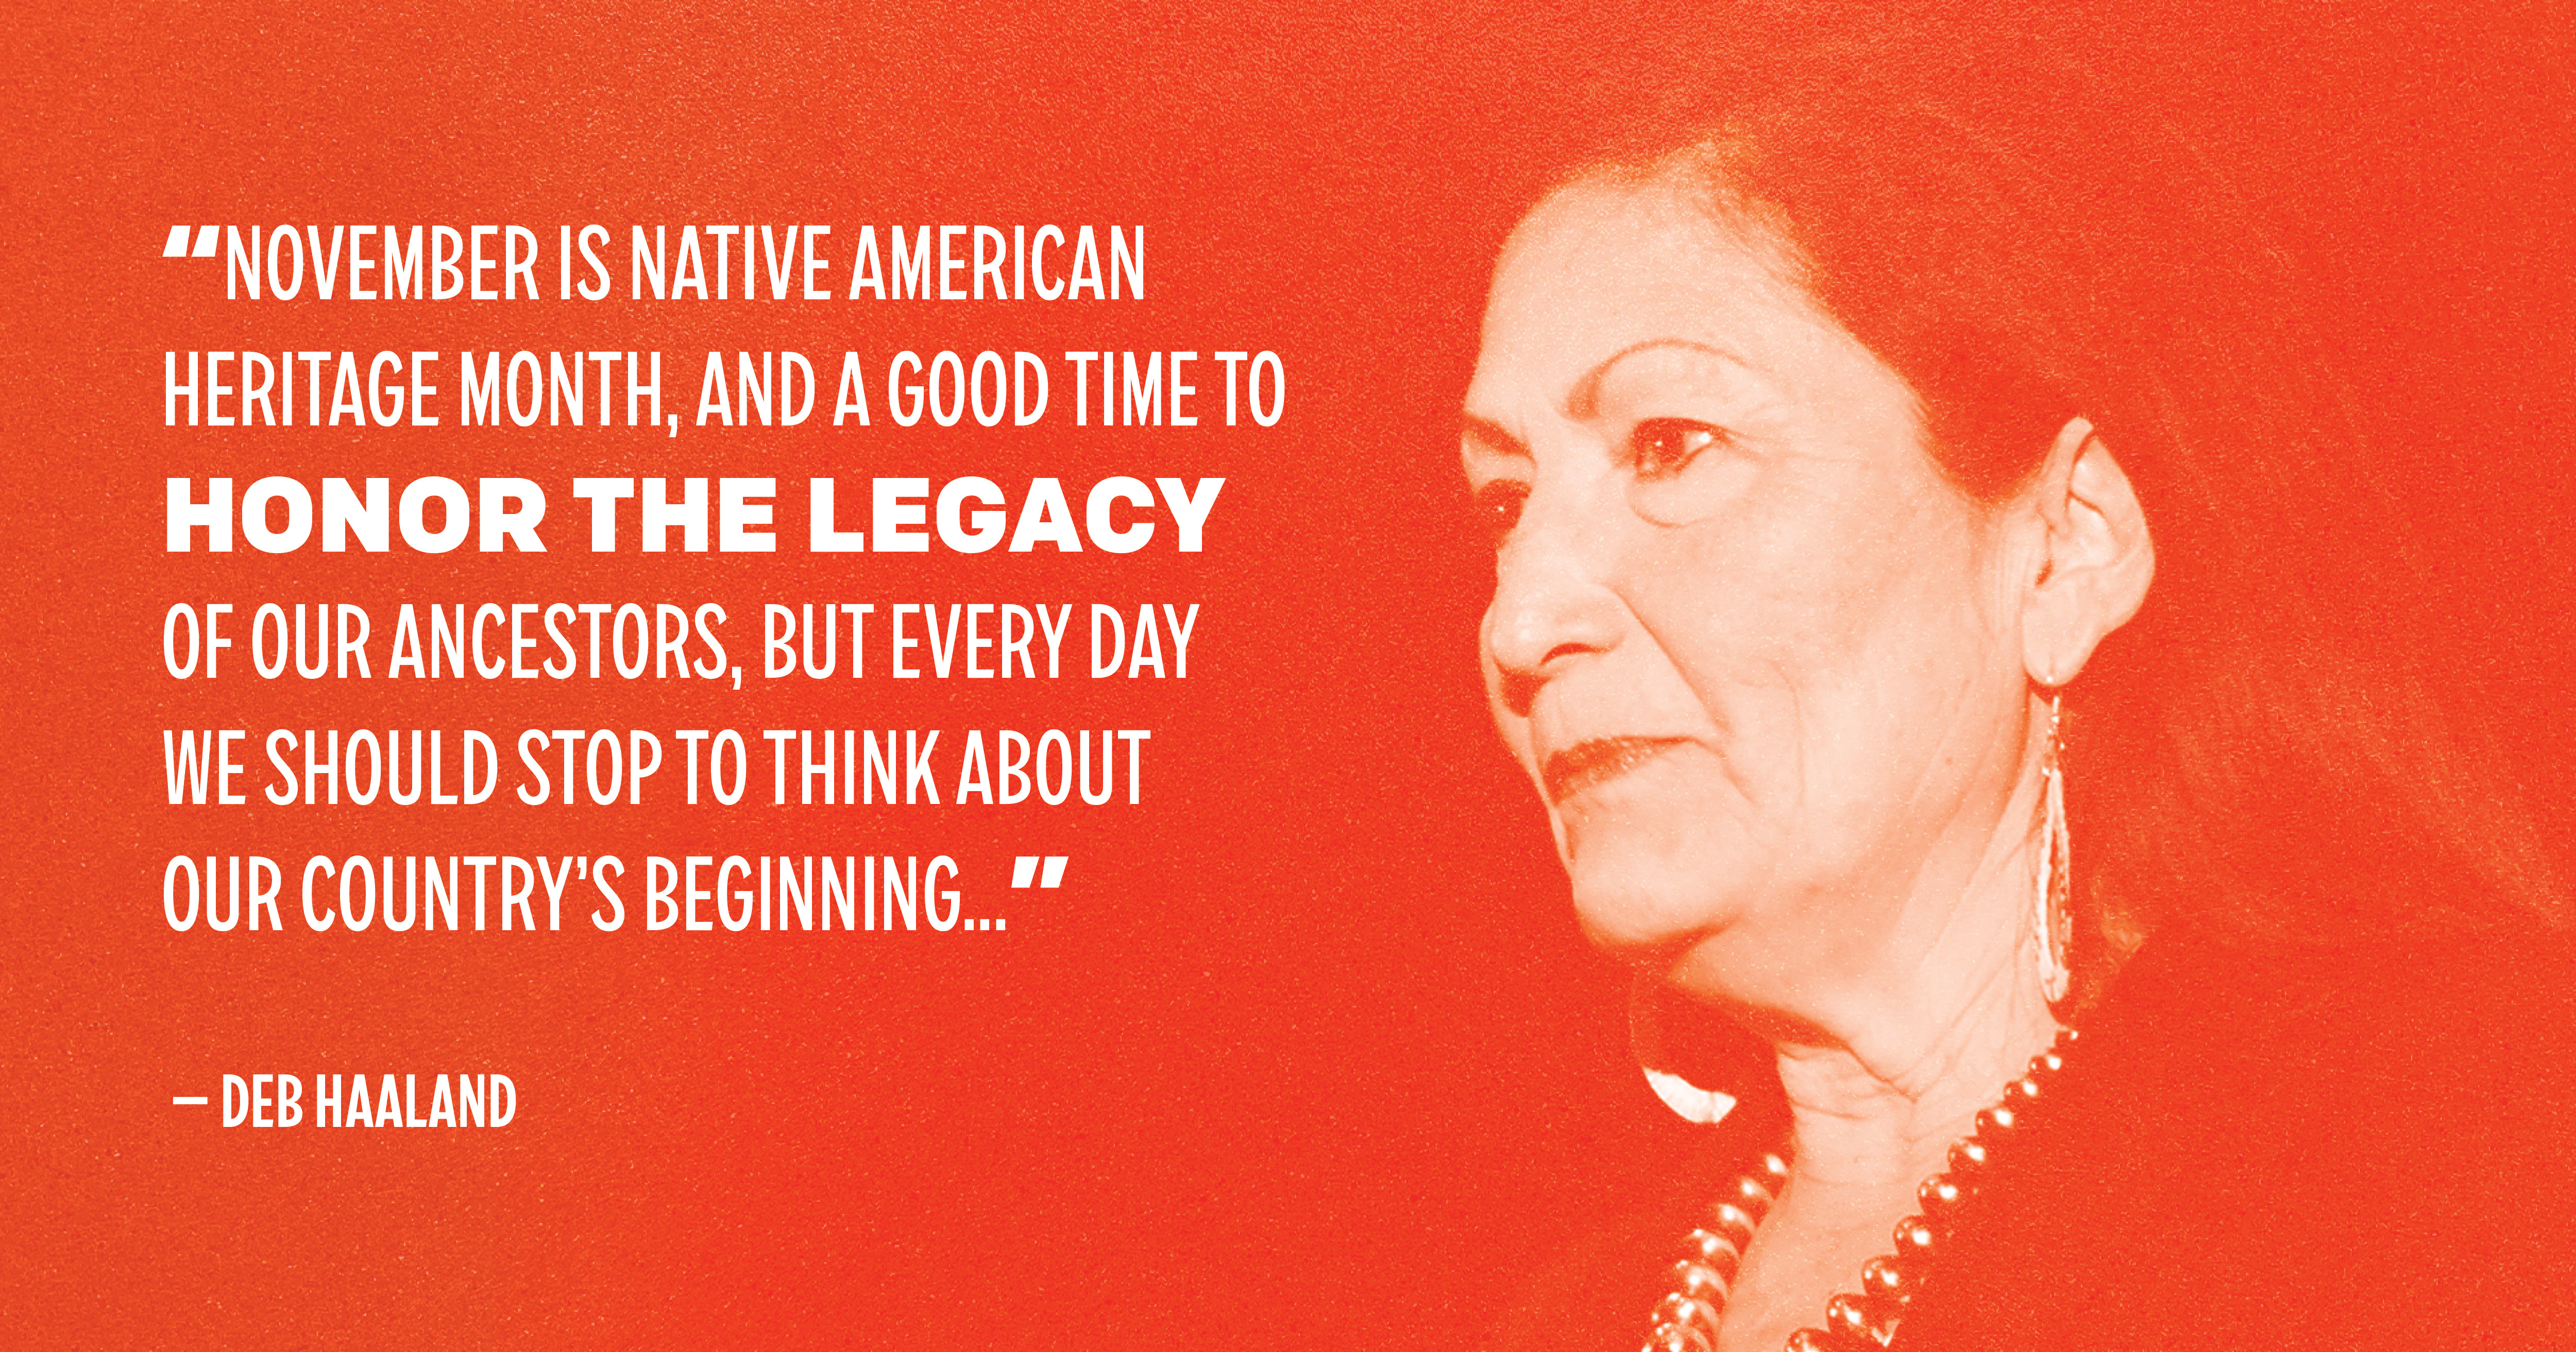 "November is Native American Heritage Month, and a good time to honor the legacy of our ancestors, but every day we should stop to think about our country's beginning..." — Deb Haaland